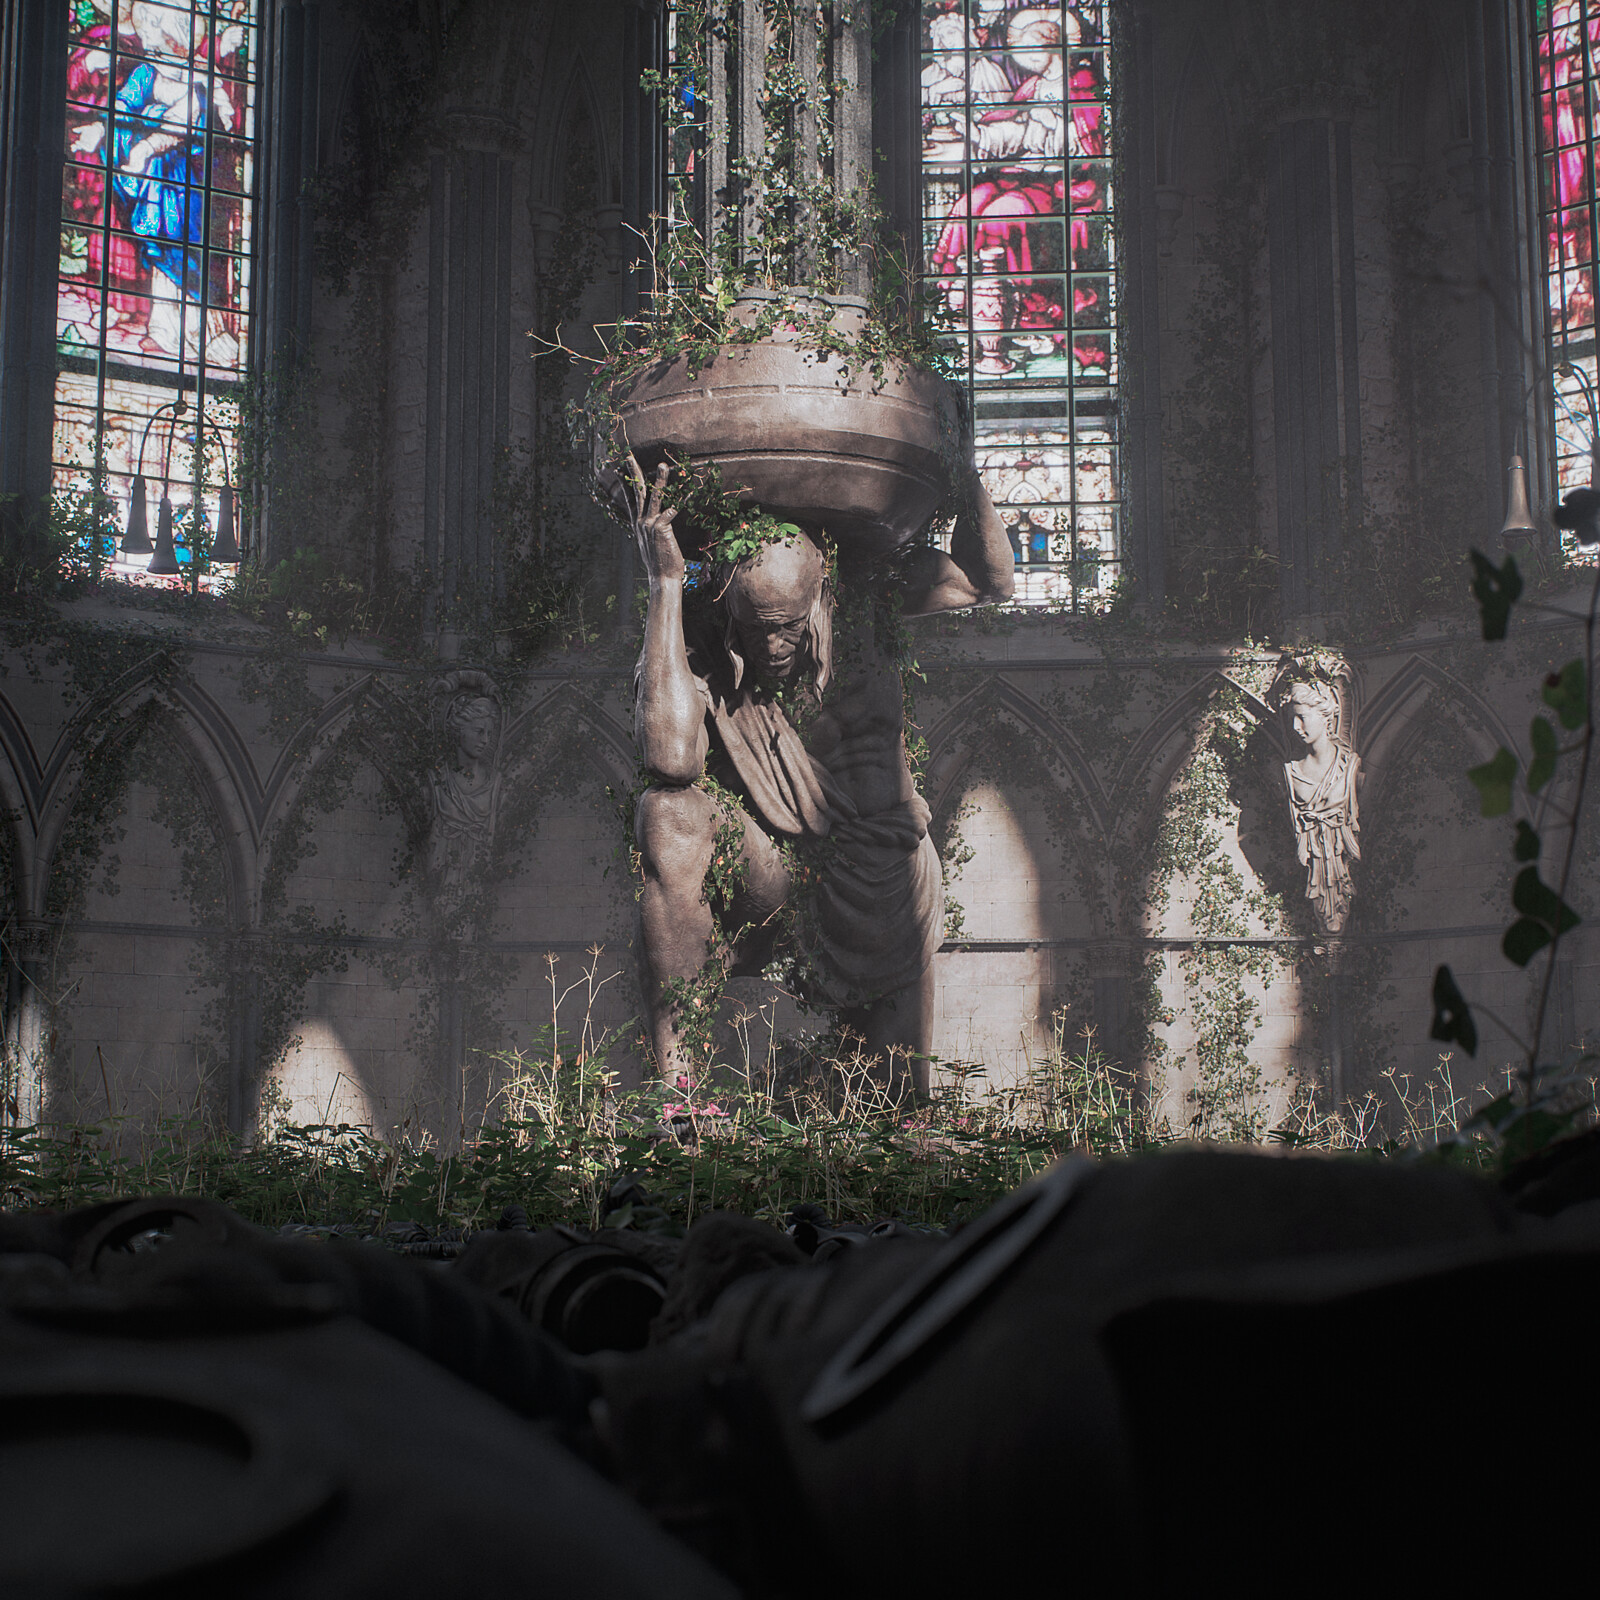 Abandoned Church | The Last of Us Environment Inspired.